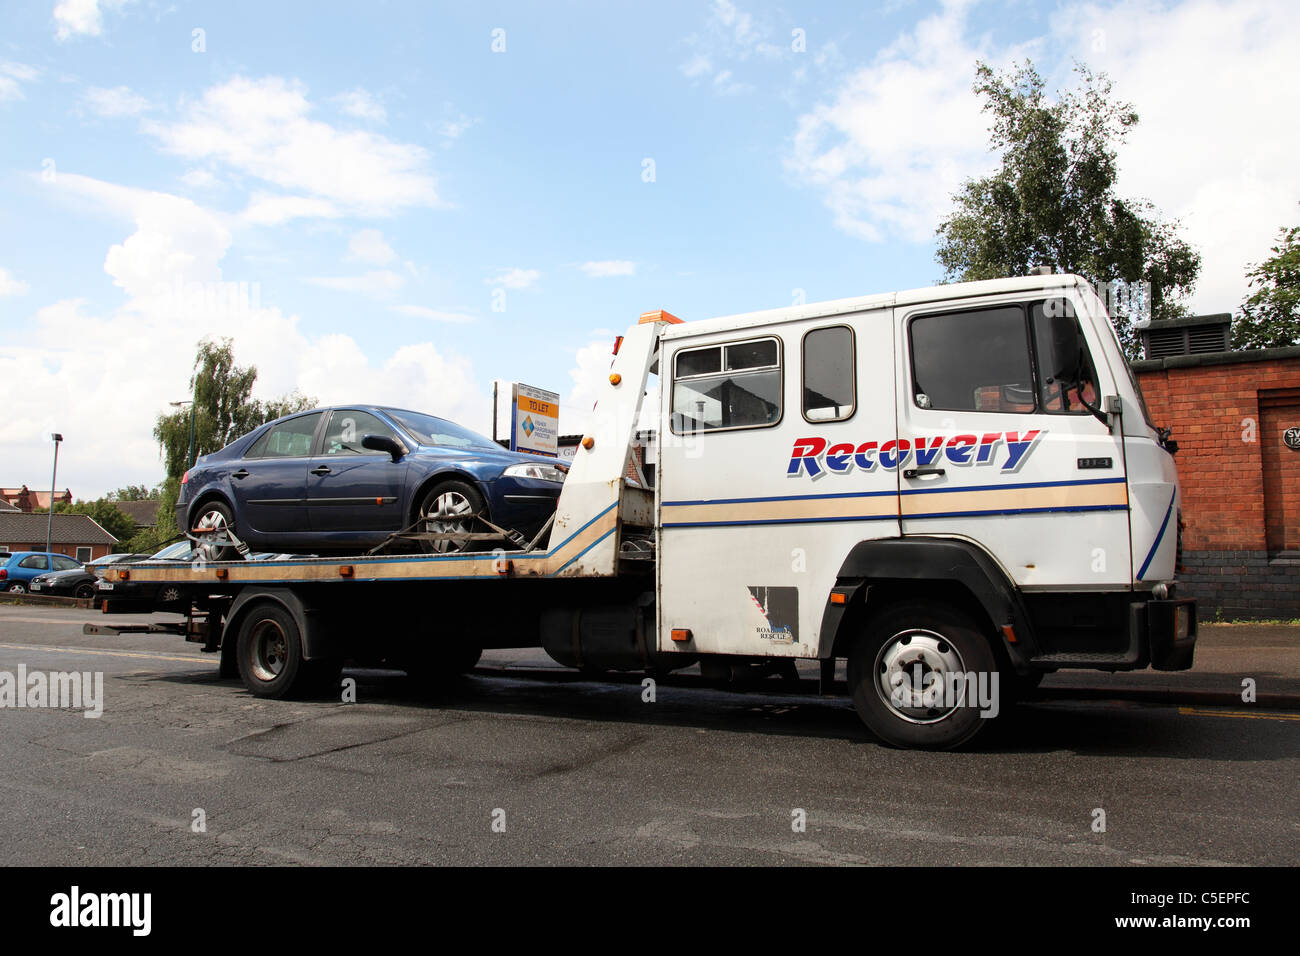 A car on a recovery vehicle in the U.K. Stock Photo